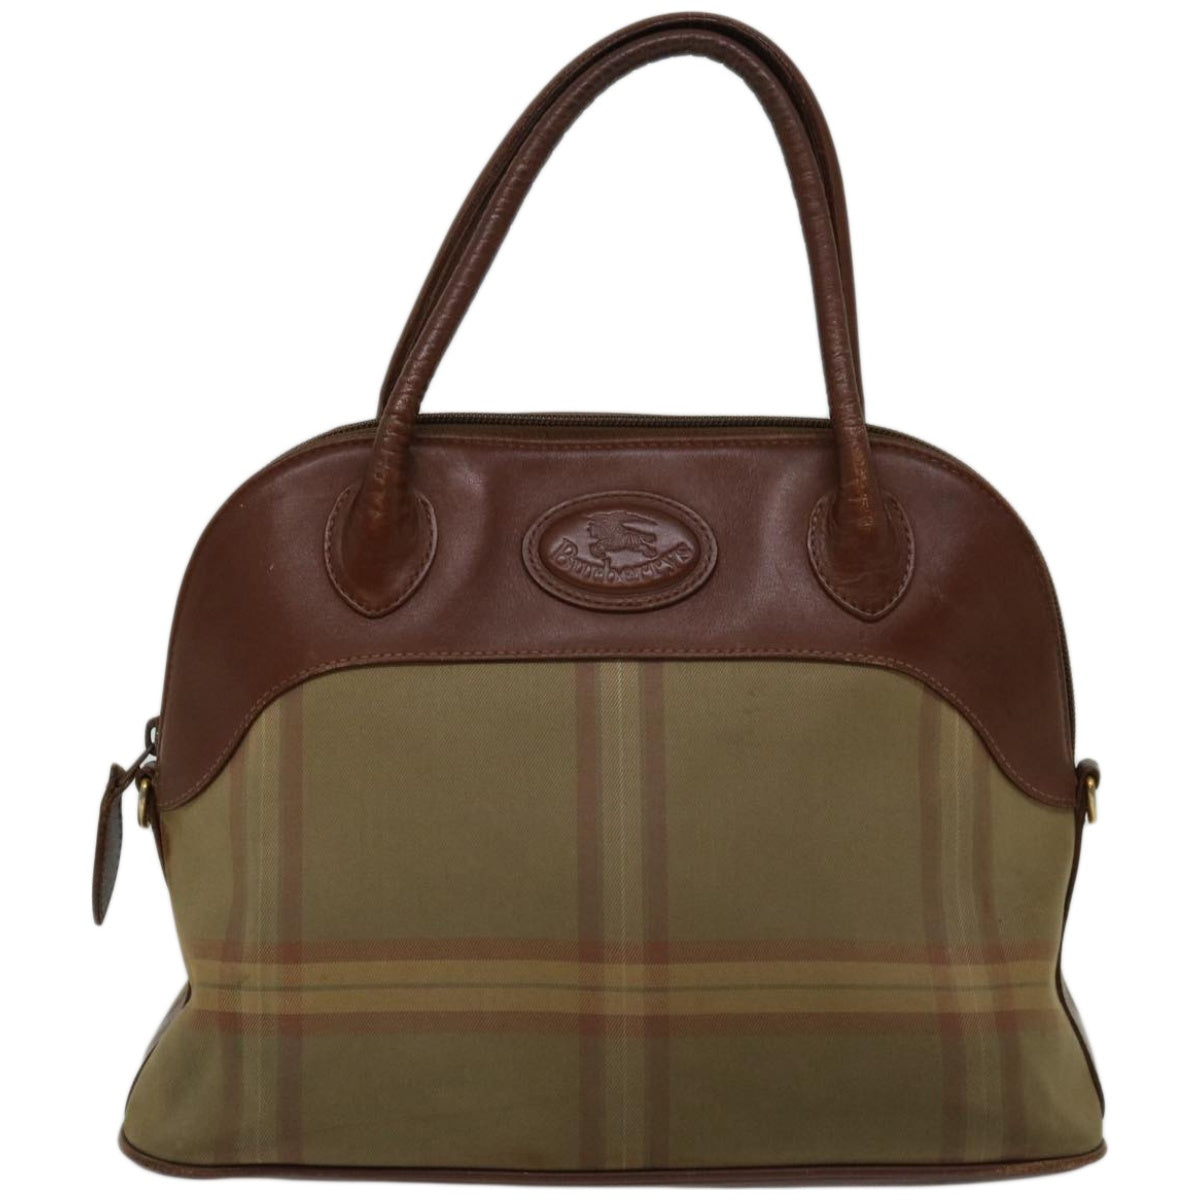 Burberrys Hand Bag Canvas Brown Auth bs12031